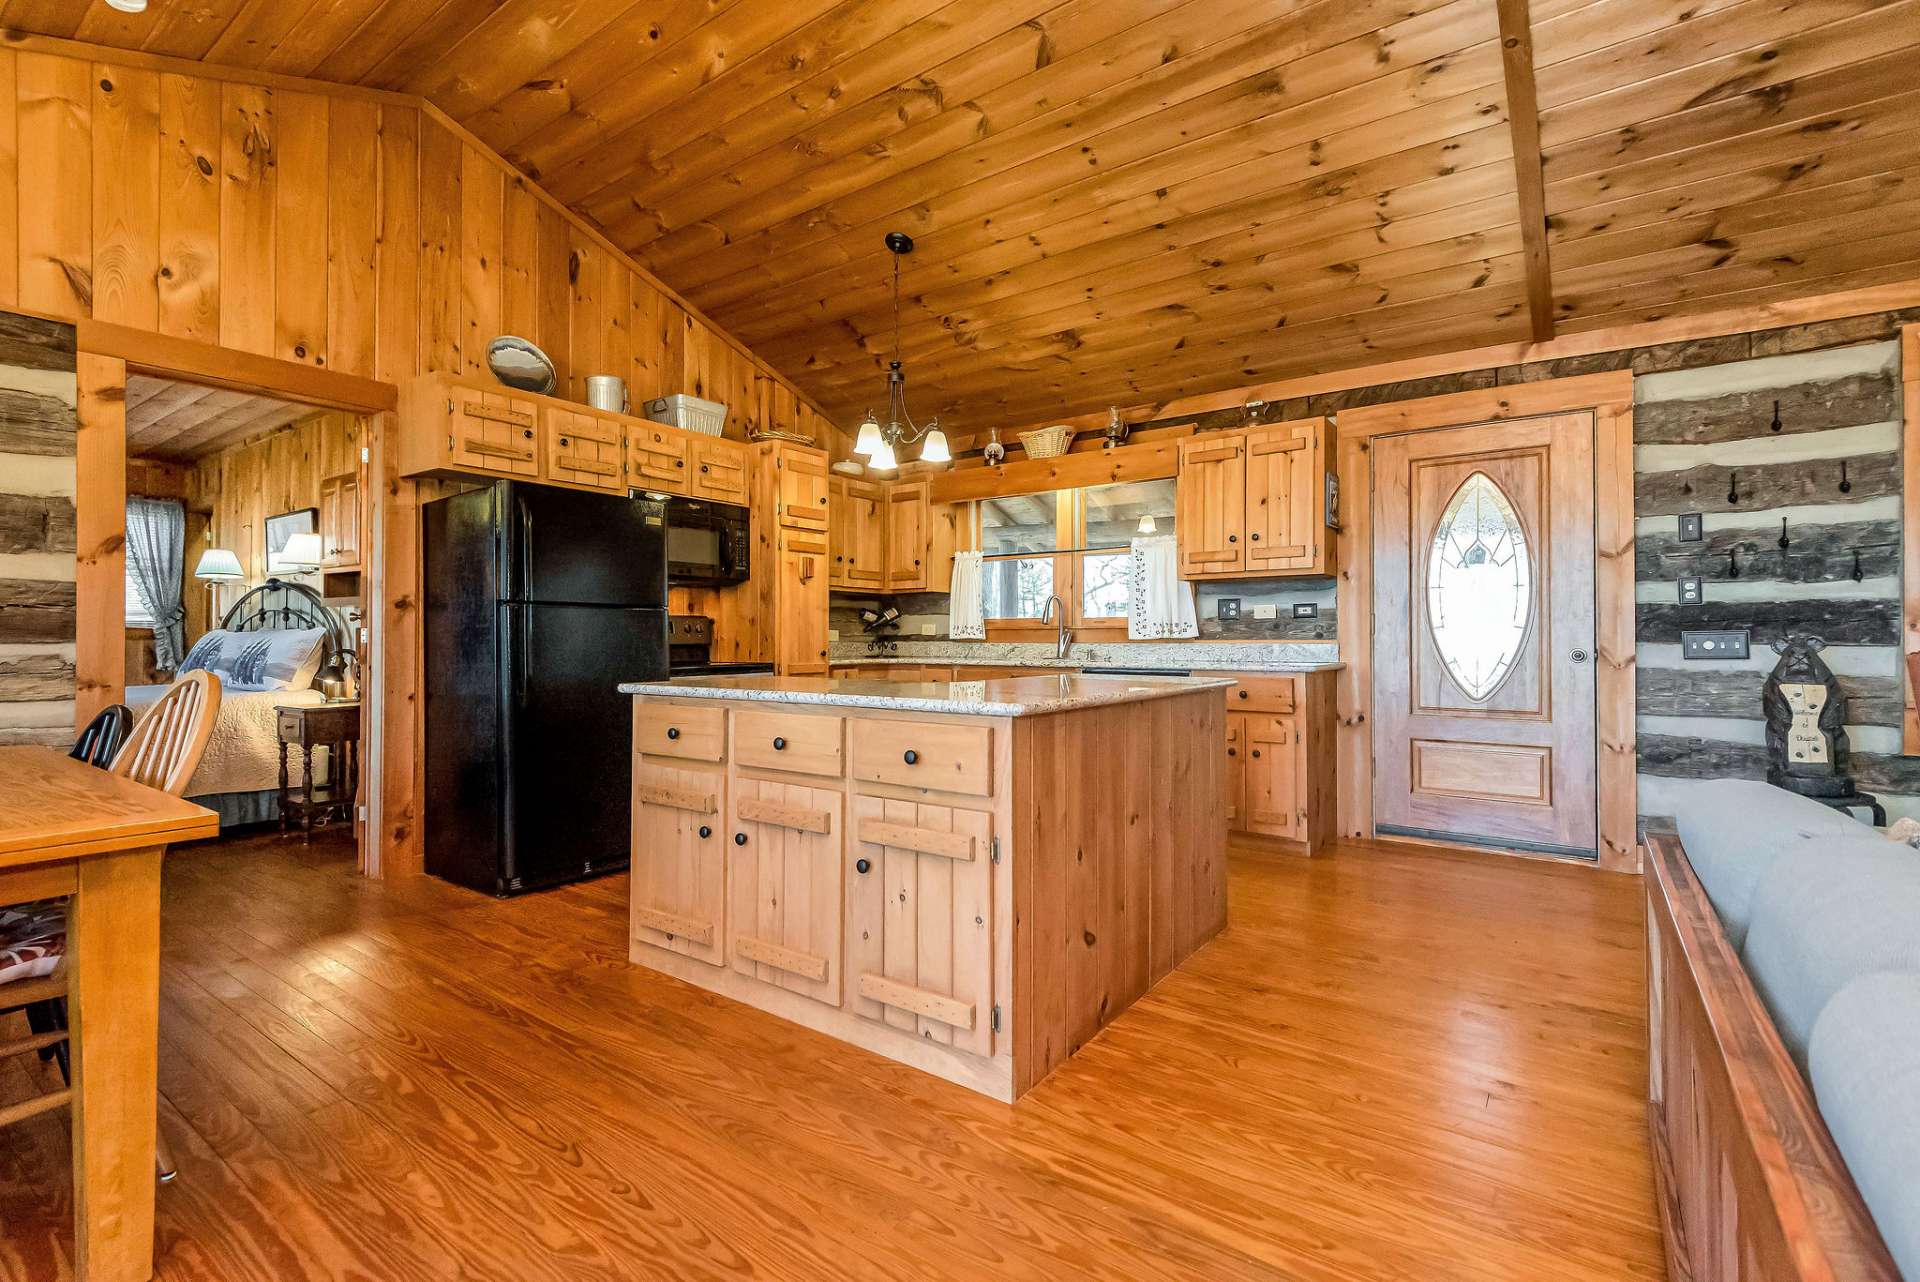 This cabin's open floor plan lends itself to easy entertaining.